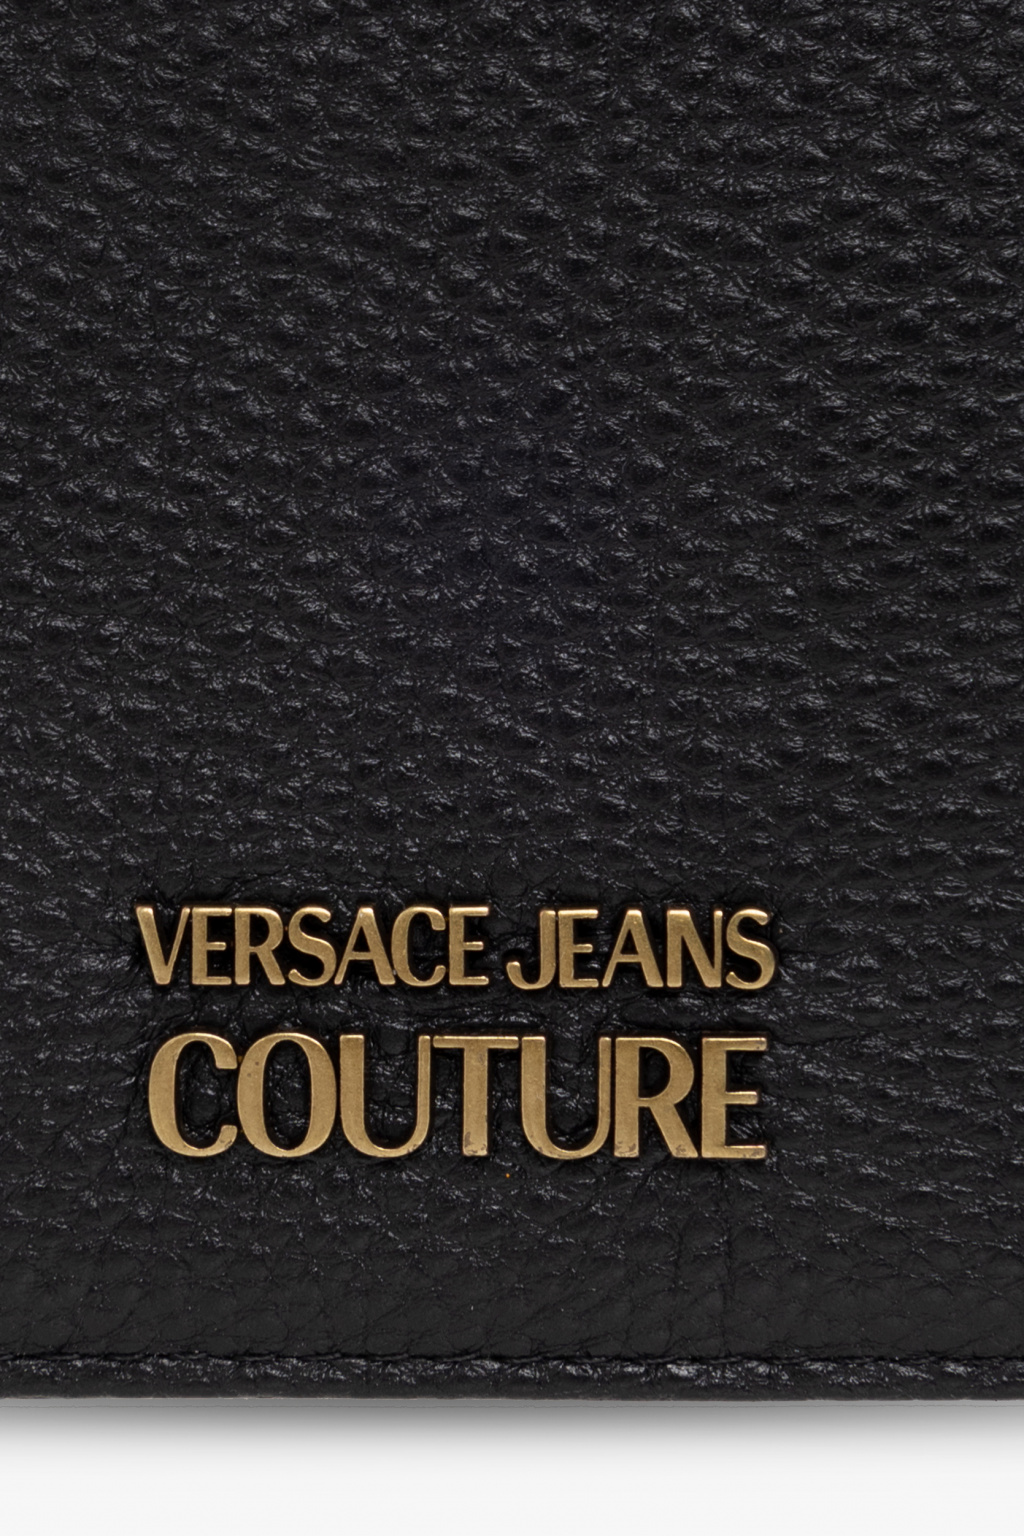 Versace mccall jeans Couture voyage knit dress